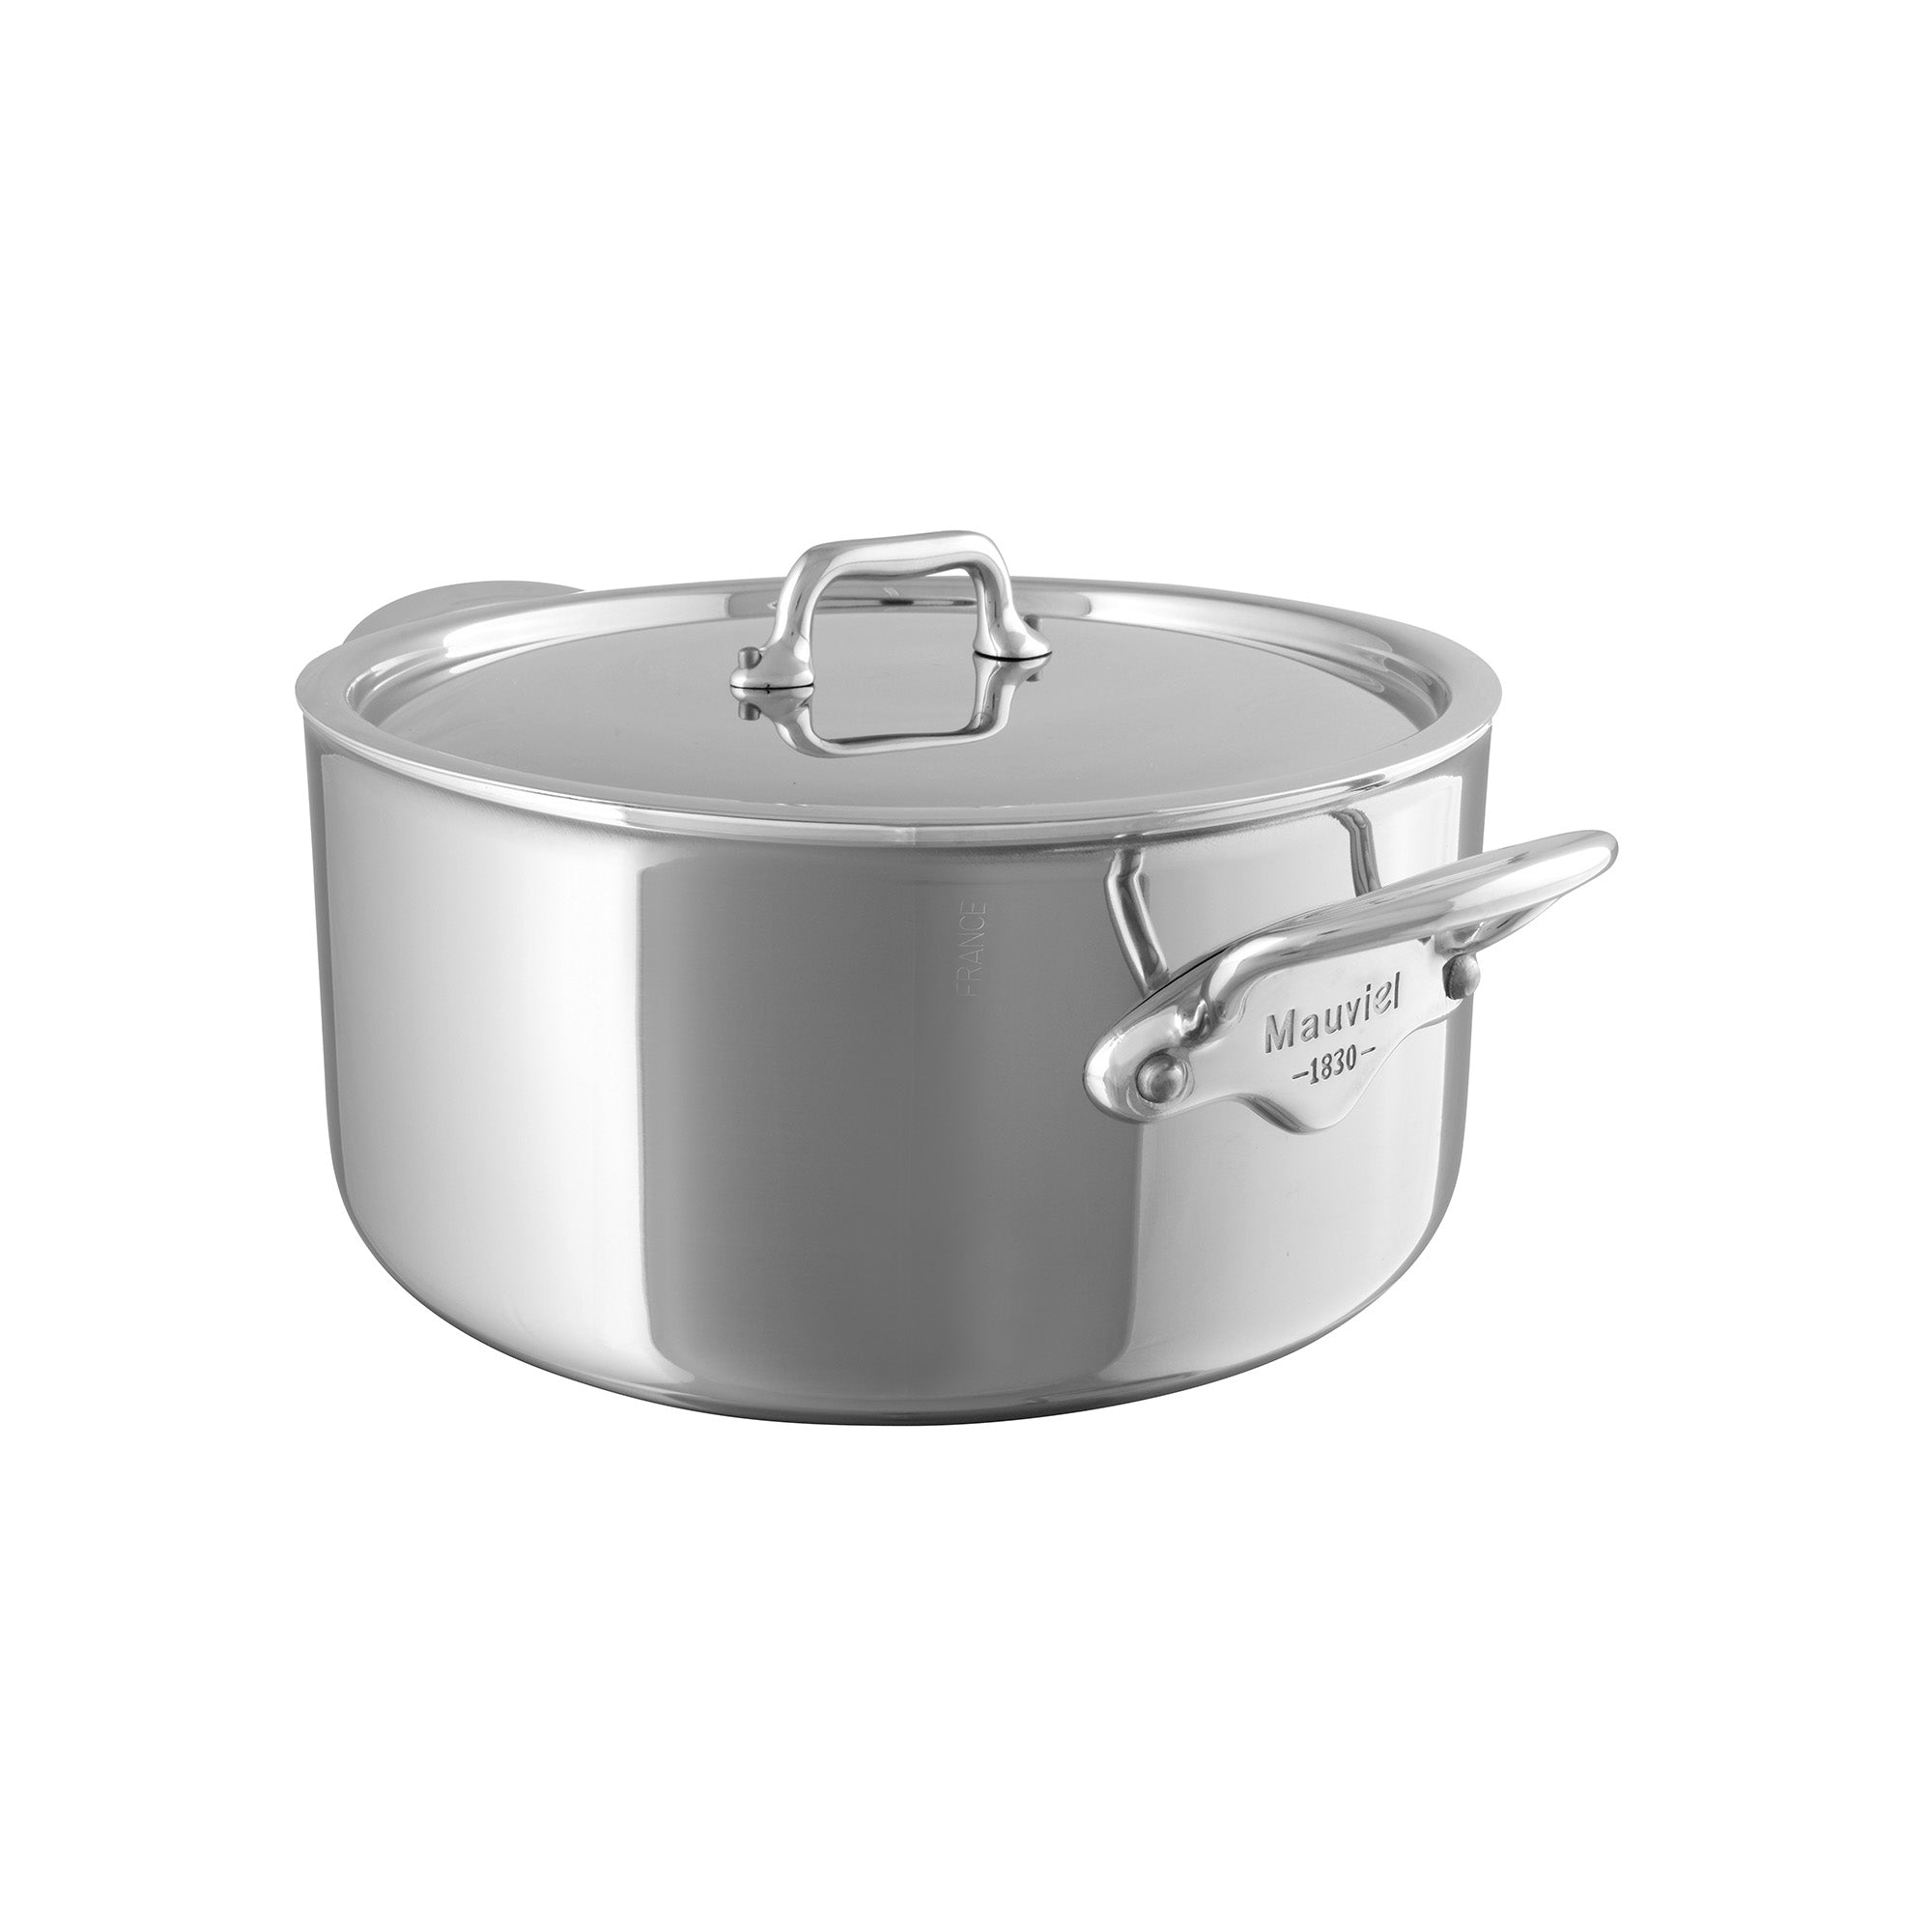 Mauviel M'URBAN 4 Tri-Ply Cocotte With Lid, Cast Stainless Steel Handles, 6.2-Qt - Mauviel USA